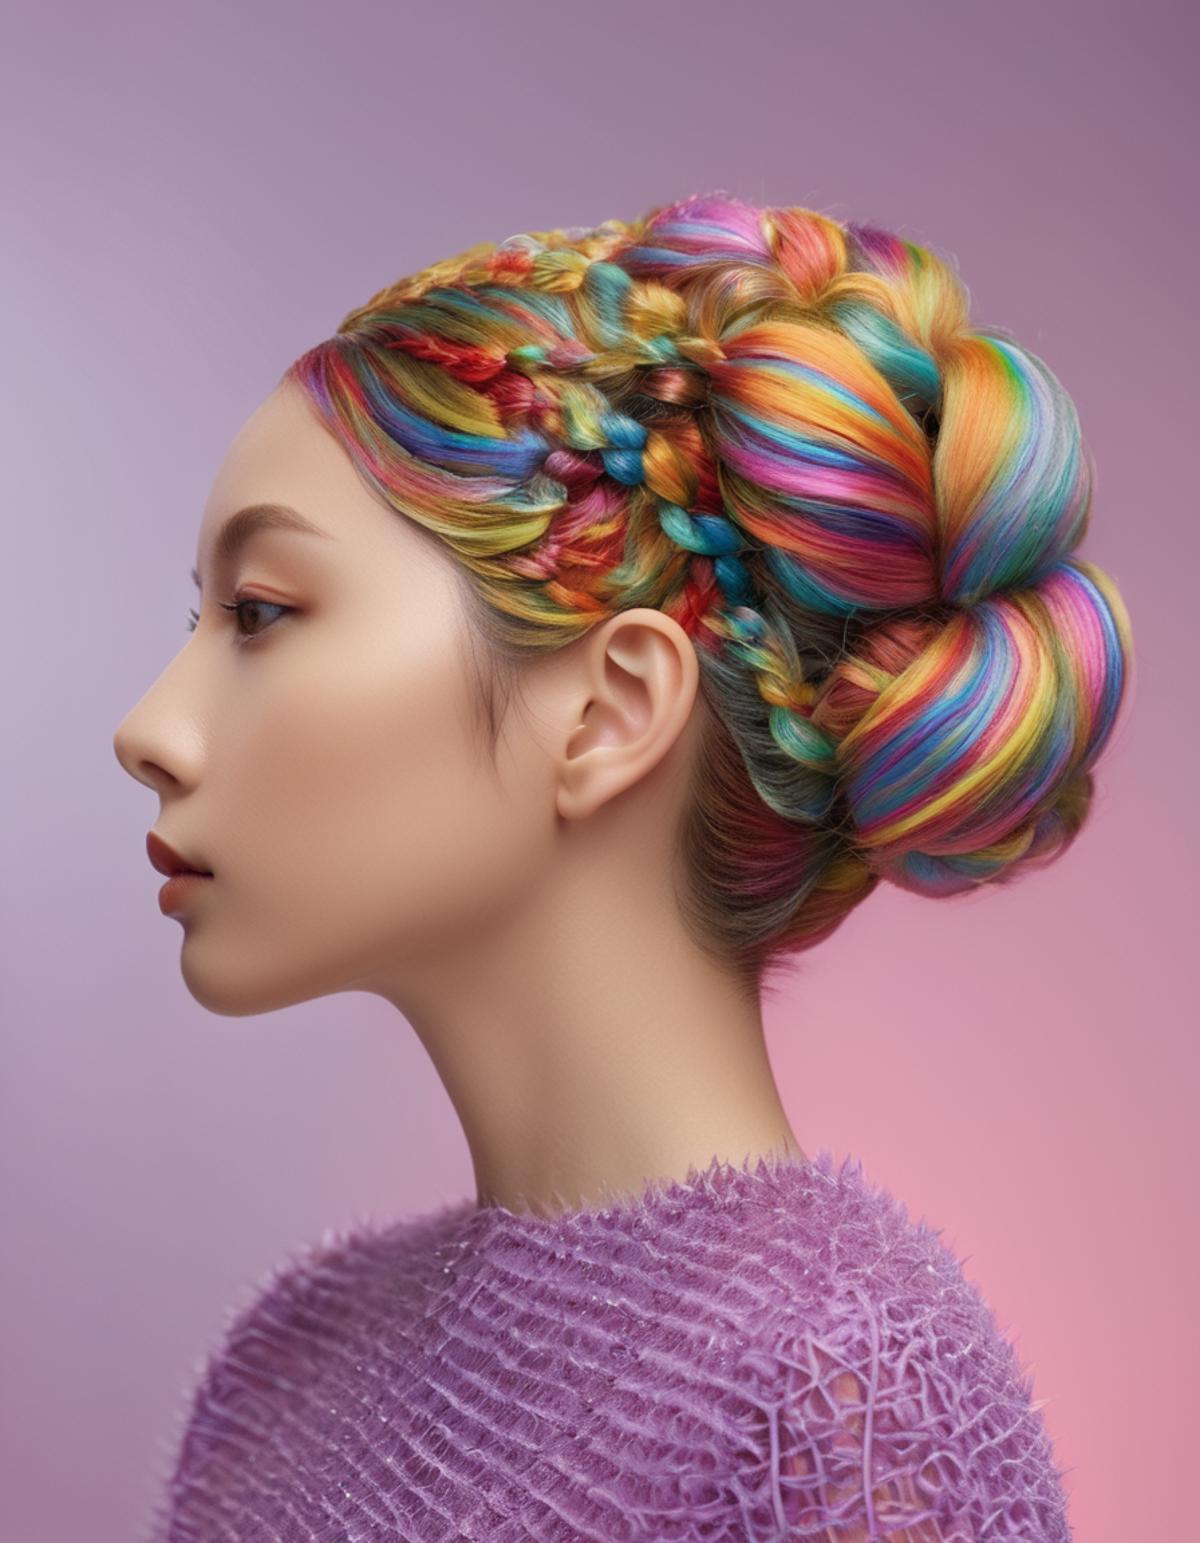 Hair Style image by aihonobono2023